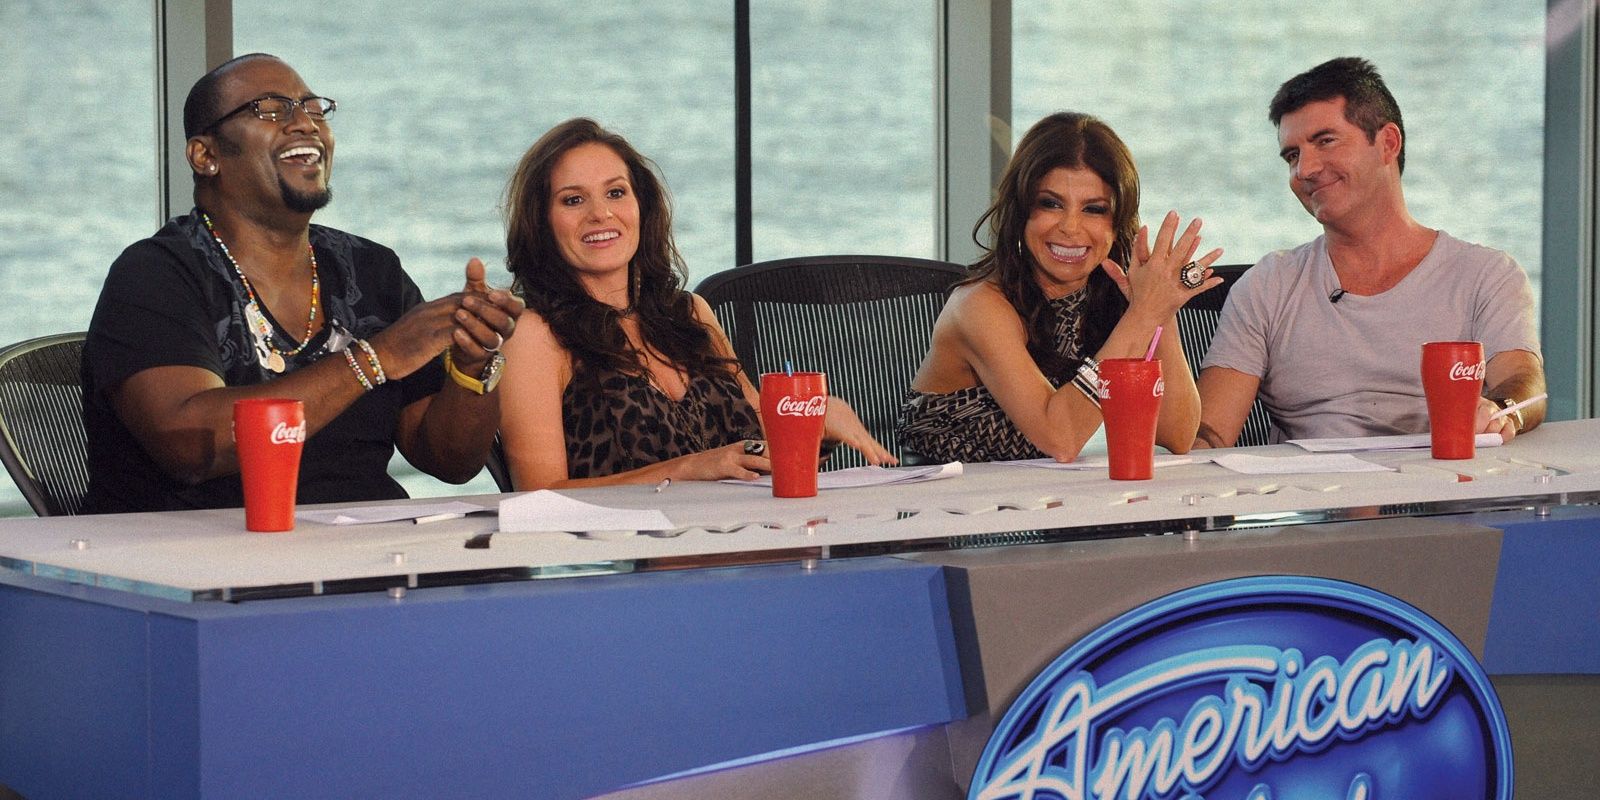 The judges of American Idol sitting at a table